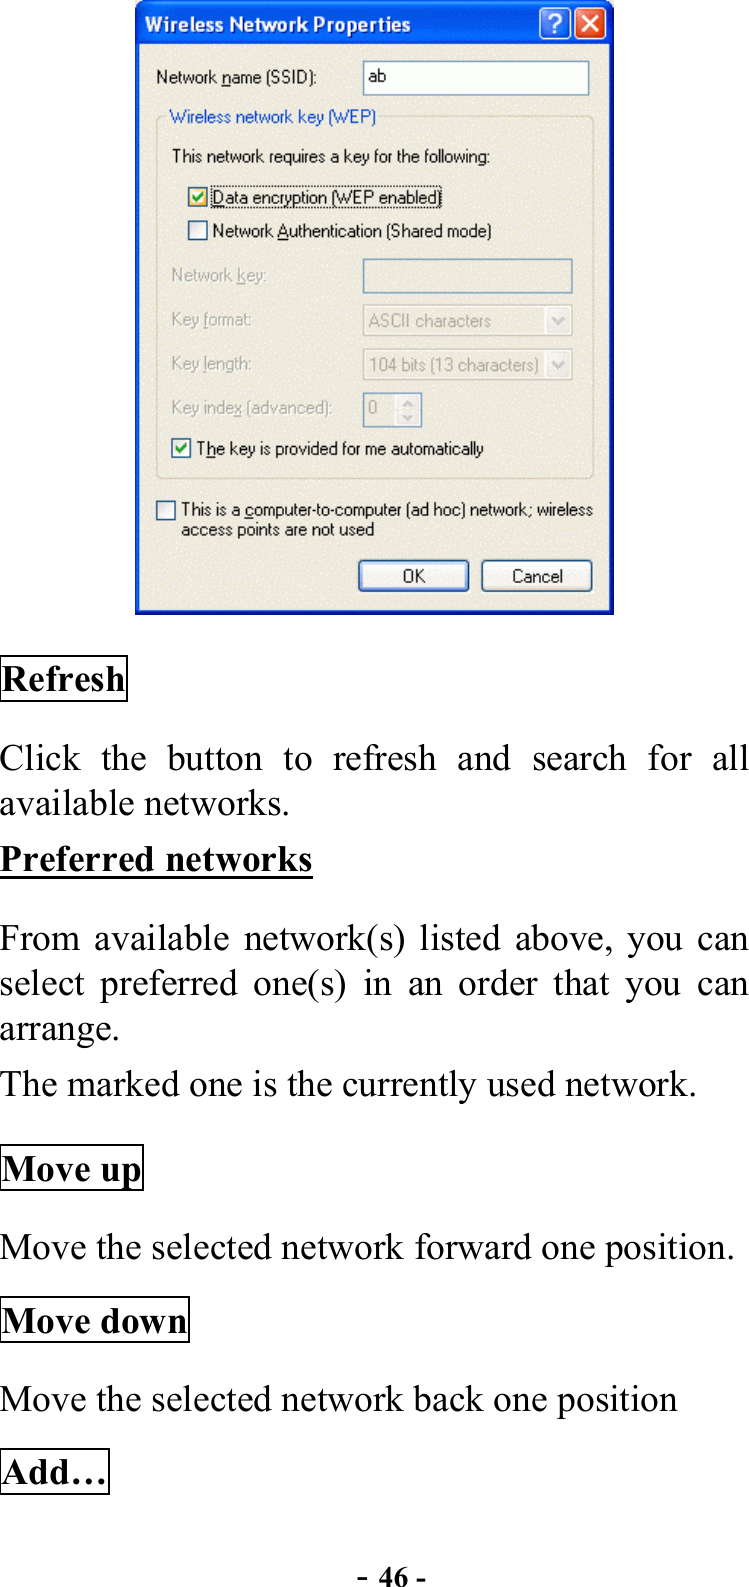  - 46 -  Refresh Click the button to refresh and search for all available networks. Preferred networks From available network(s) listed above, you can select preferred one(s) in an order that you can arrange.  The marked one is the currently used network. Move up Move the selected network forward one position.   Move down Move the selected network back one position Add… 